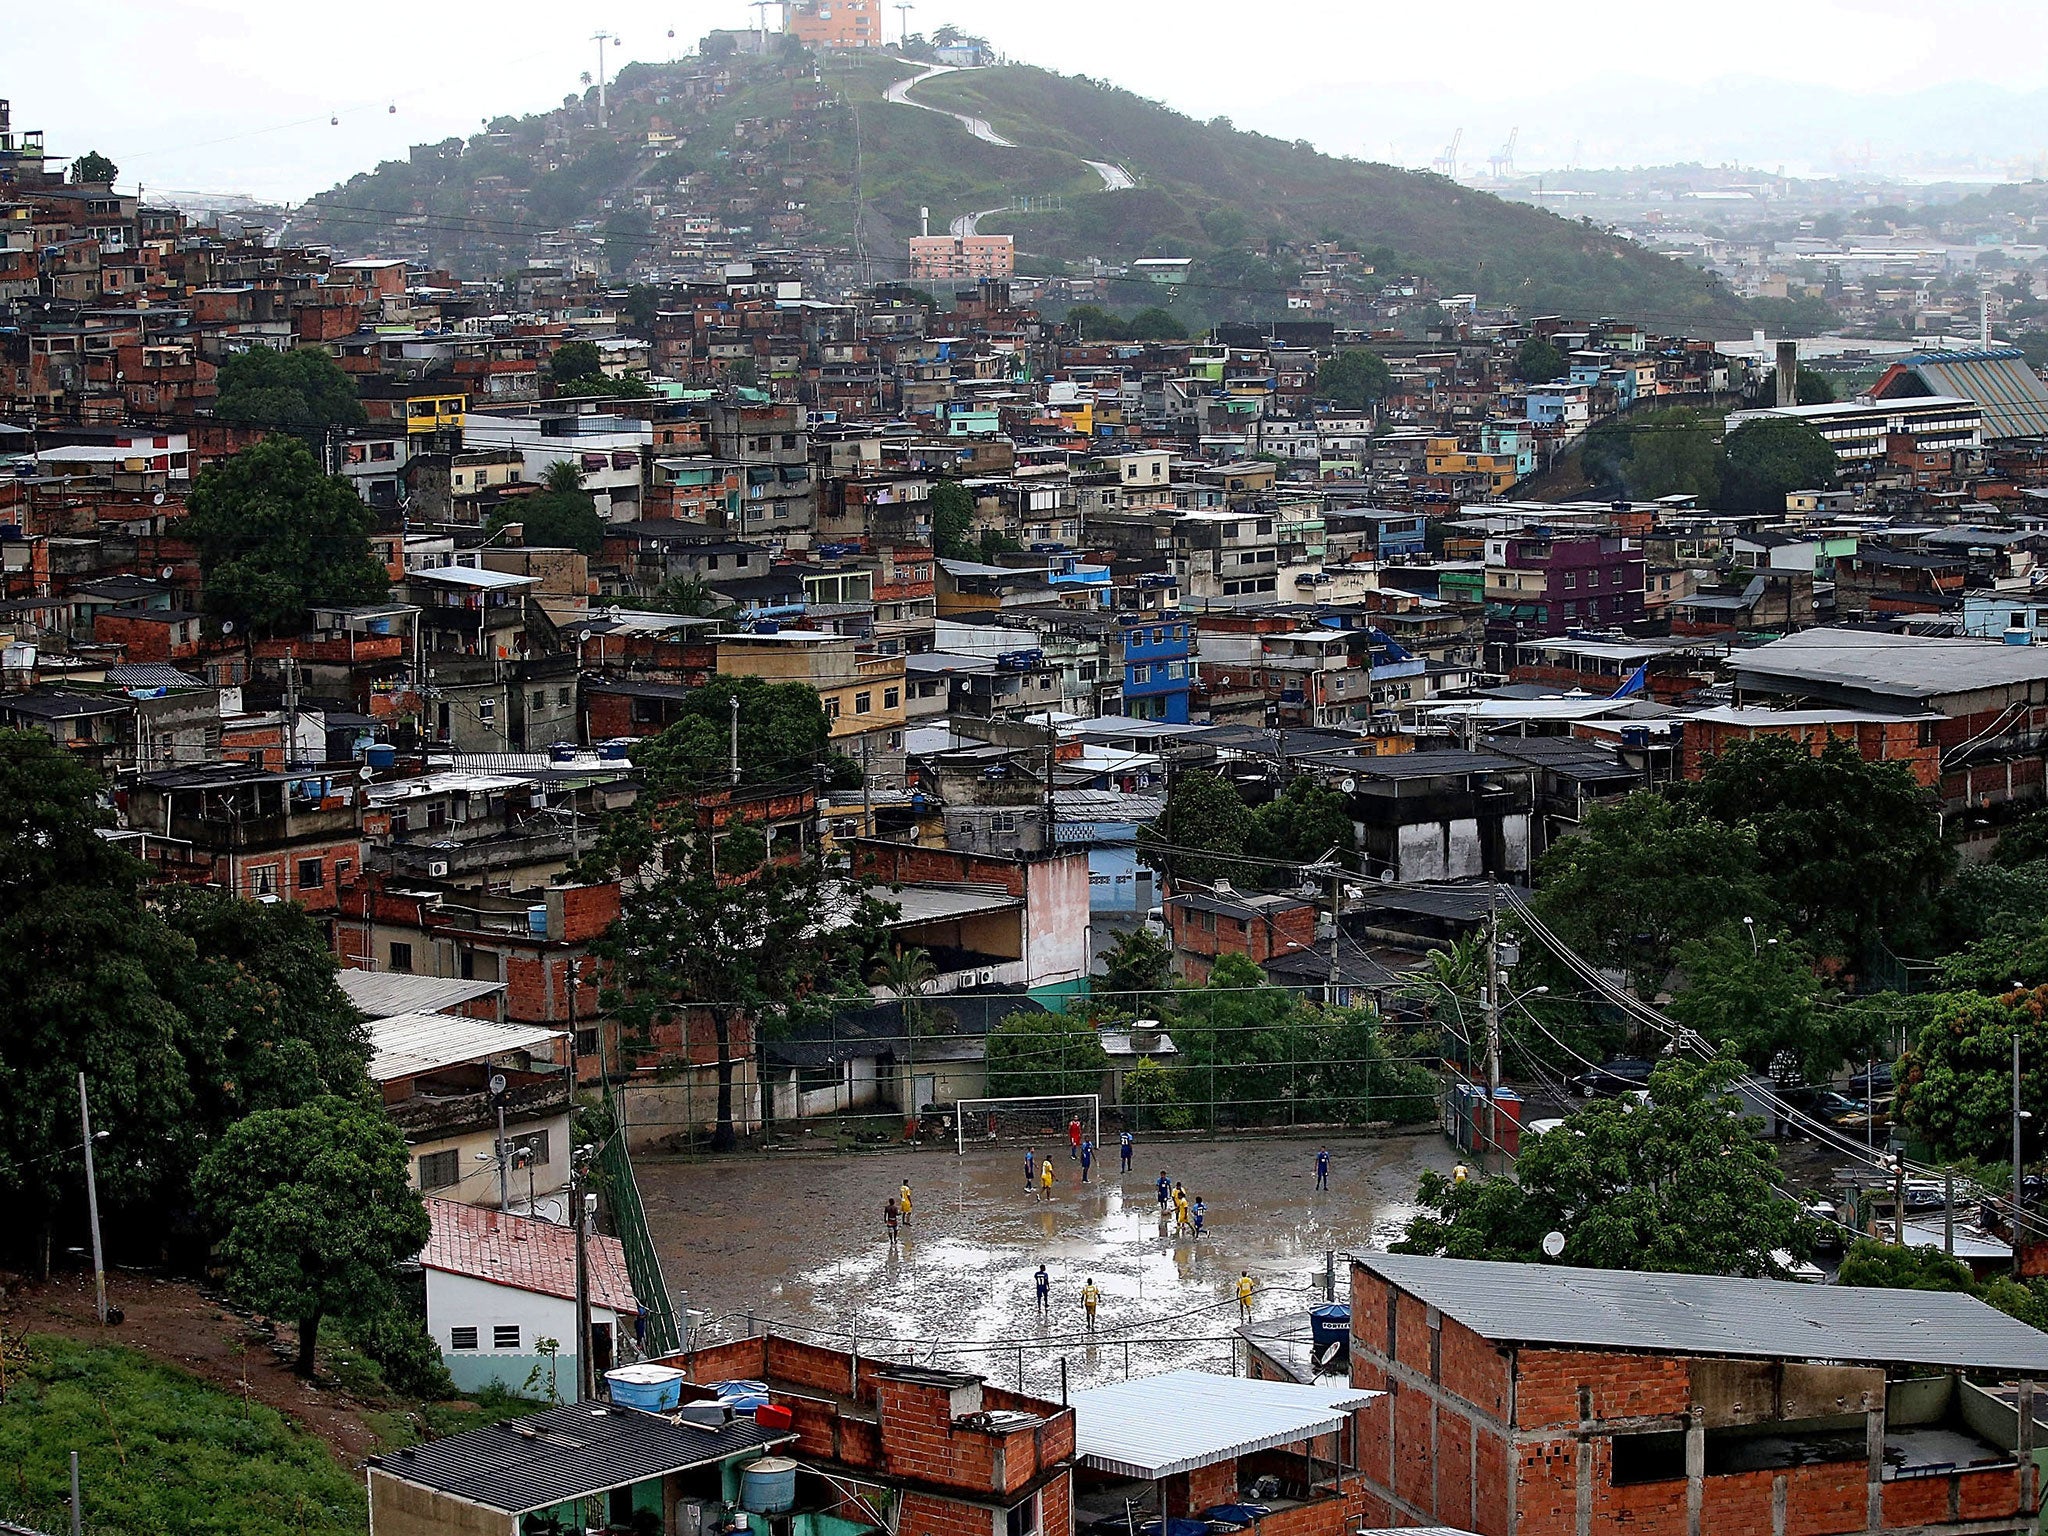 The Complexo do Alemao favela in Rio de Janeiro is a good example of urban planning, says a leading scientist